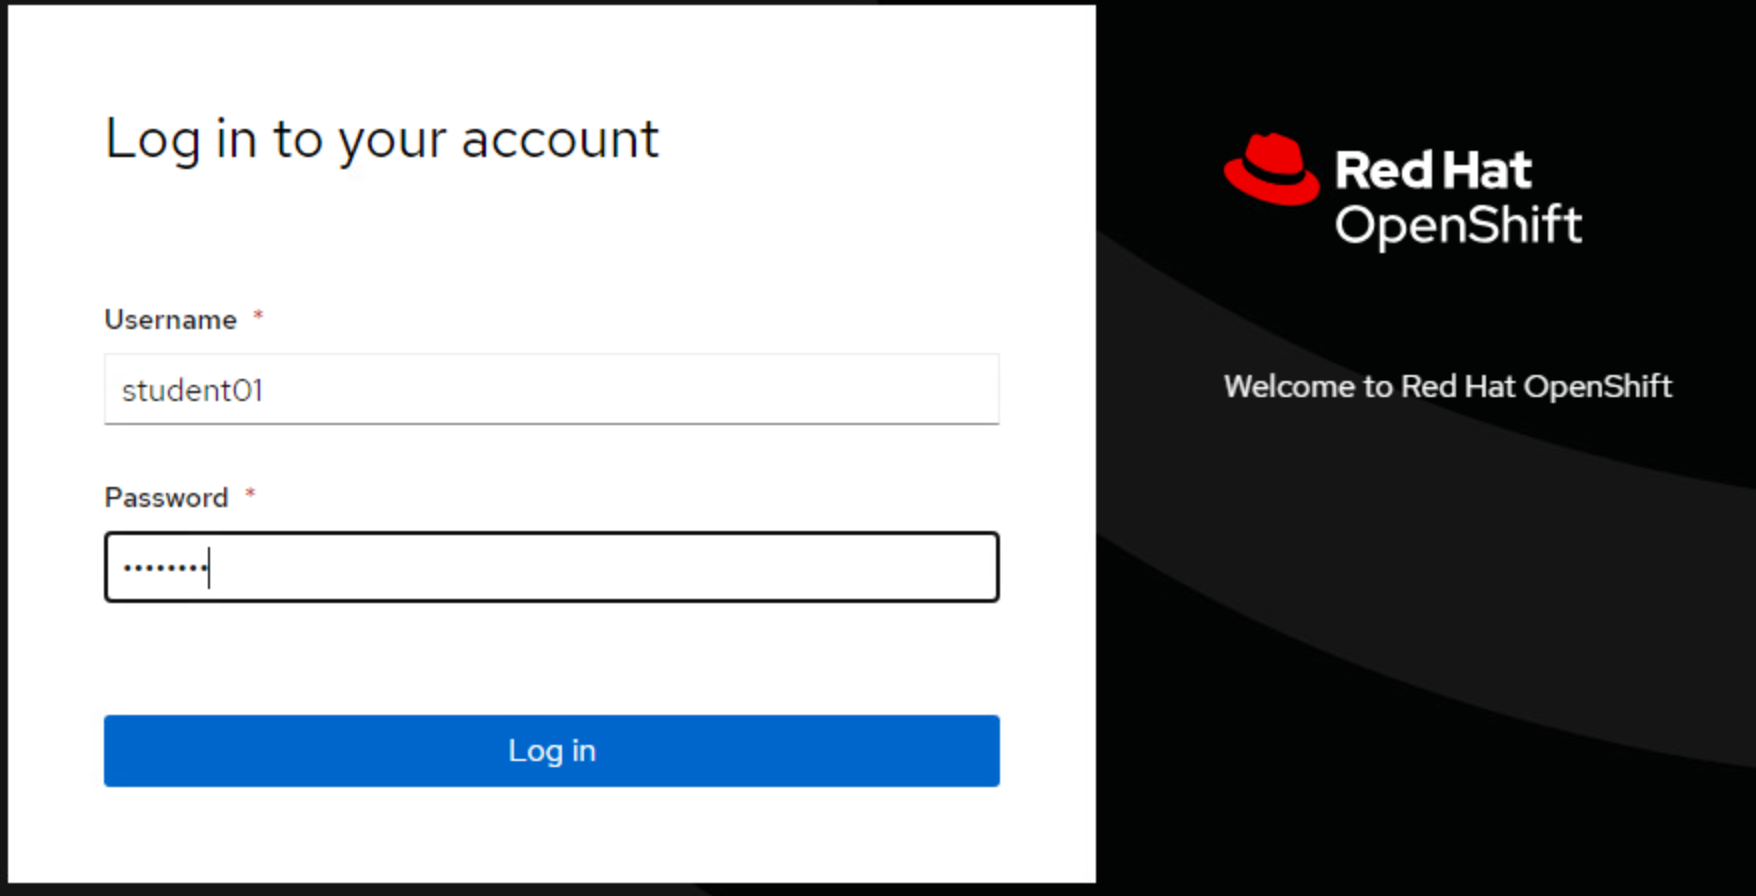 OpenShift login with student01 through student20 with password Passw0rd